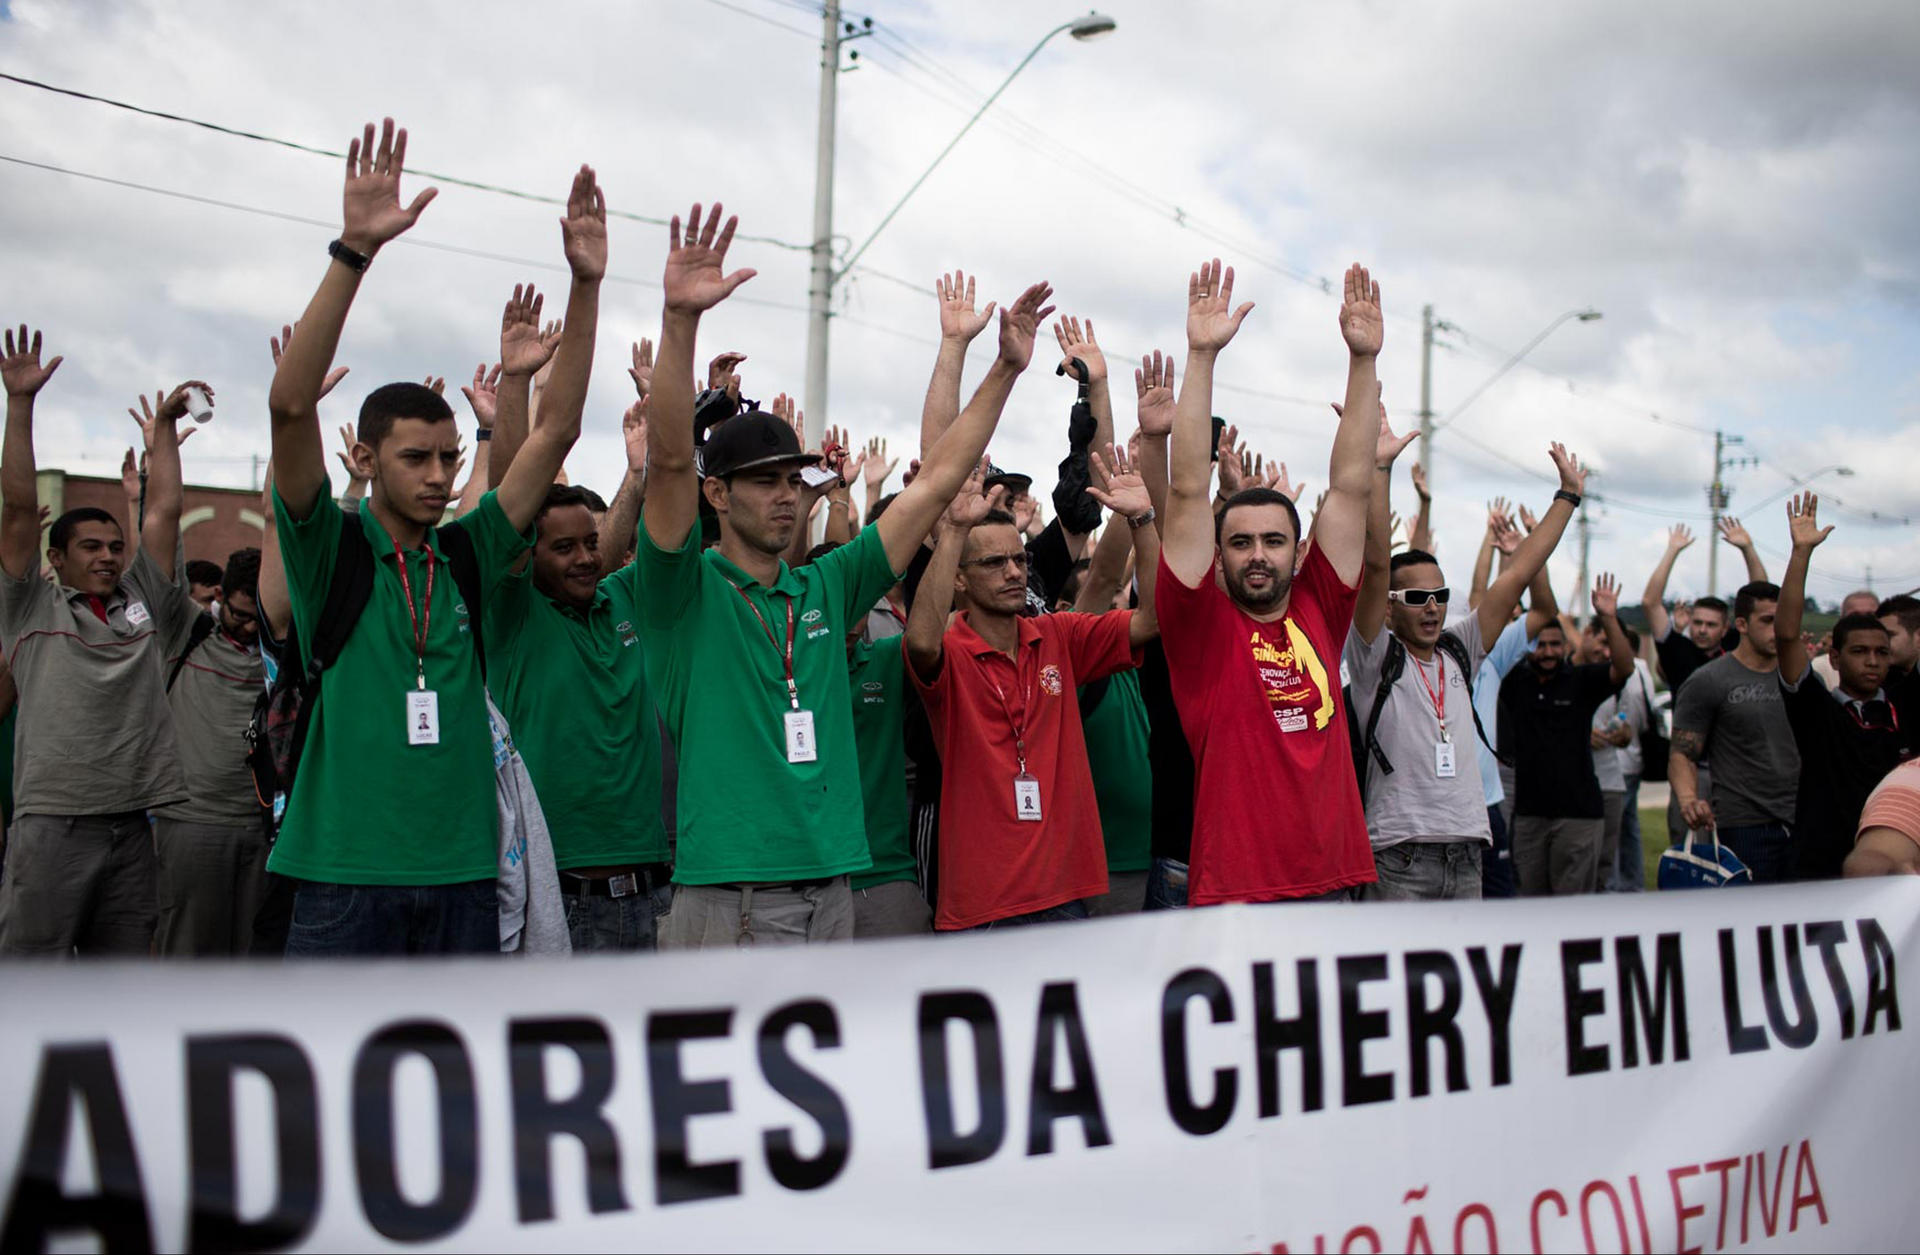 Chery's workers voice support for a strike. Photo: Heriberto Araujo